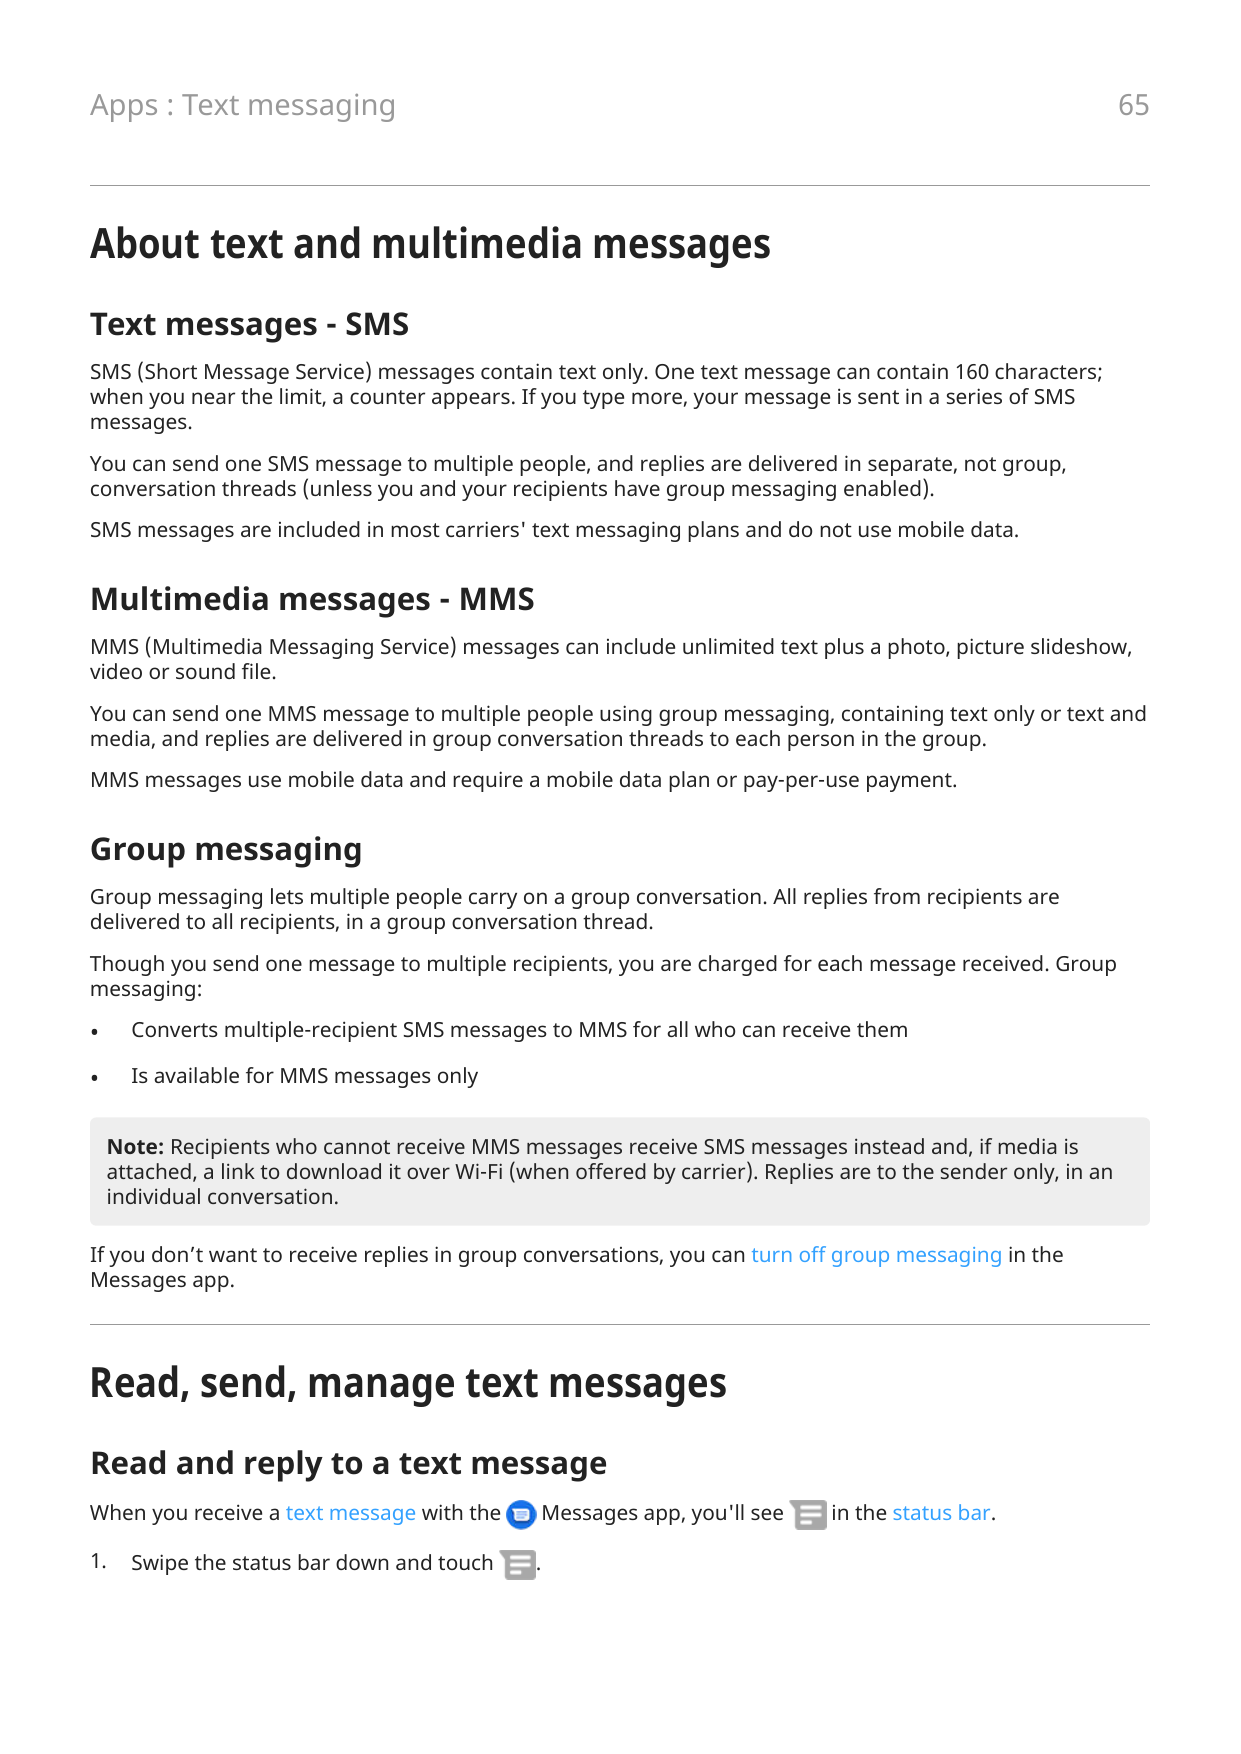 65Apps : Text messagingAbout text and multimedia messagesText messages - SMSSMS (Short Message Service) messages contain text on